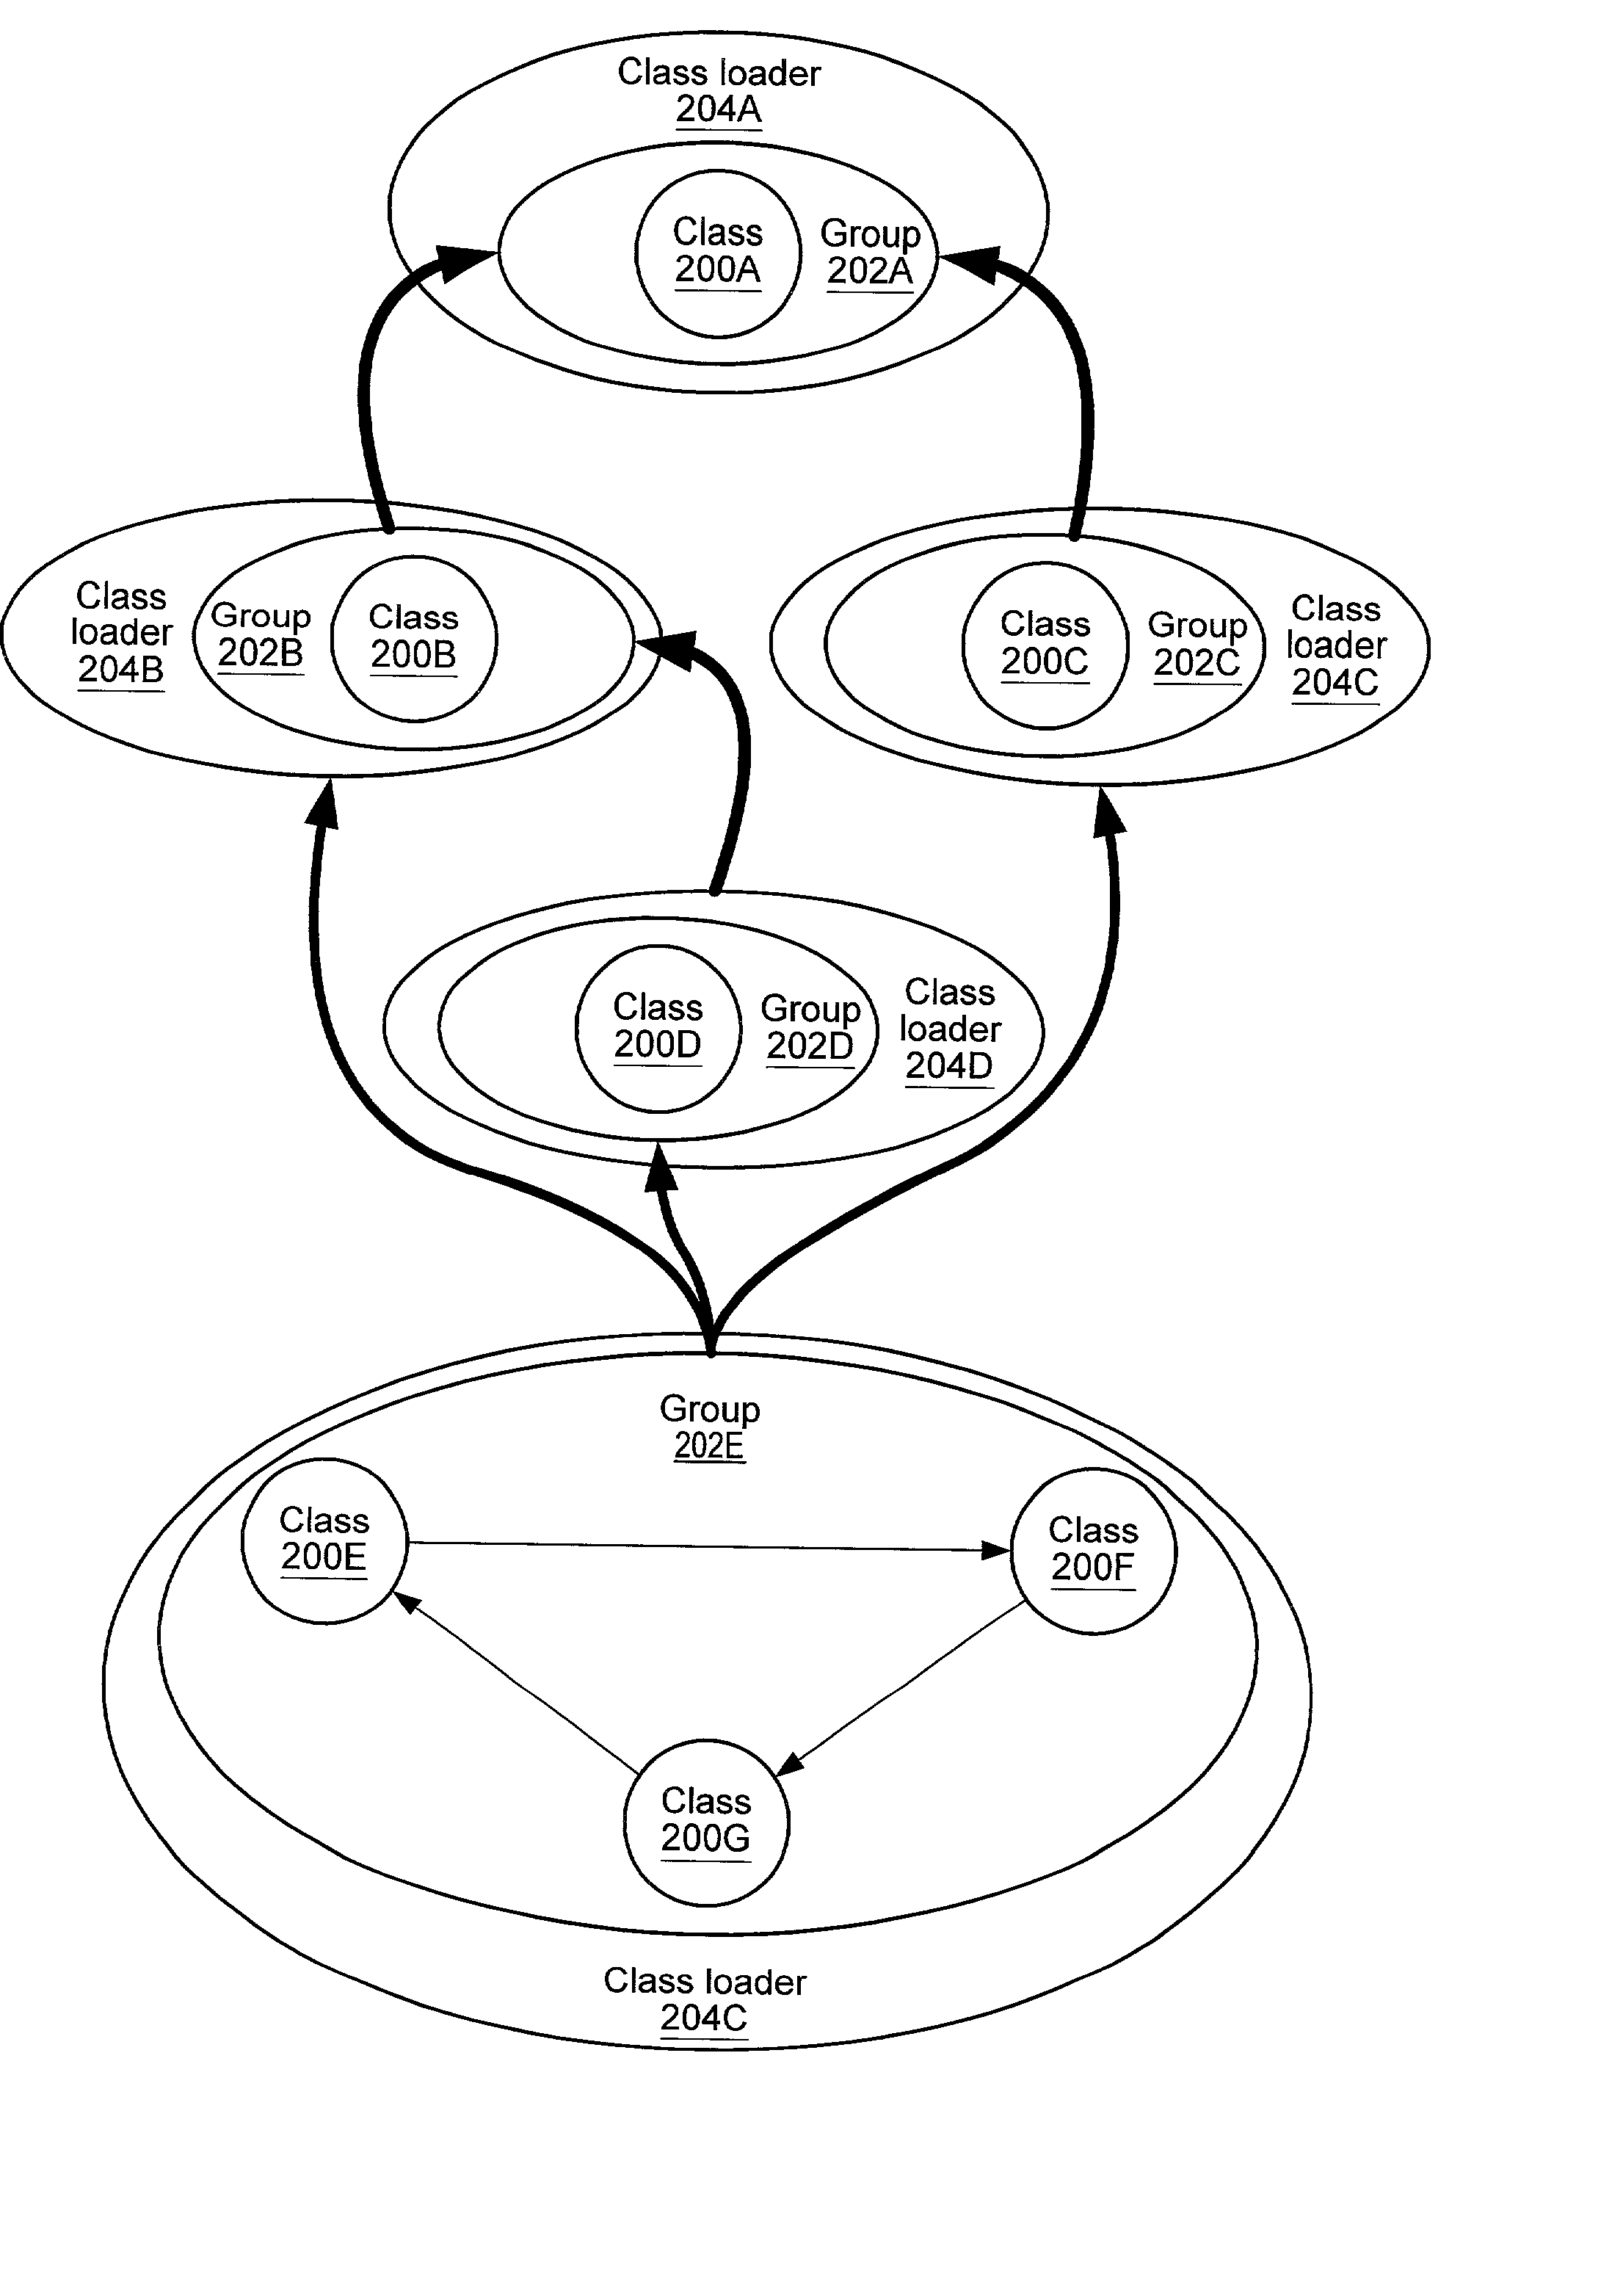 Class dependency graph-based class loading and reloading